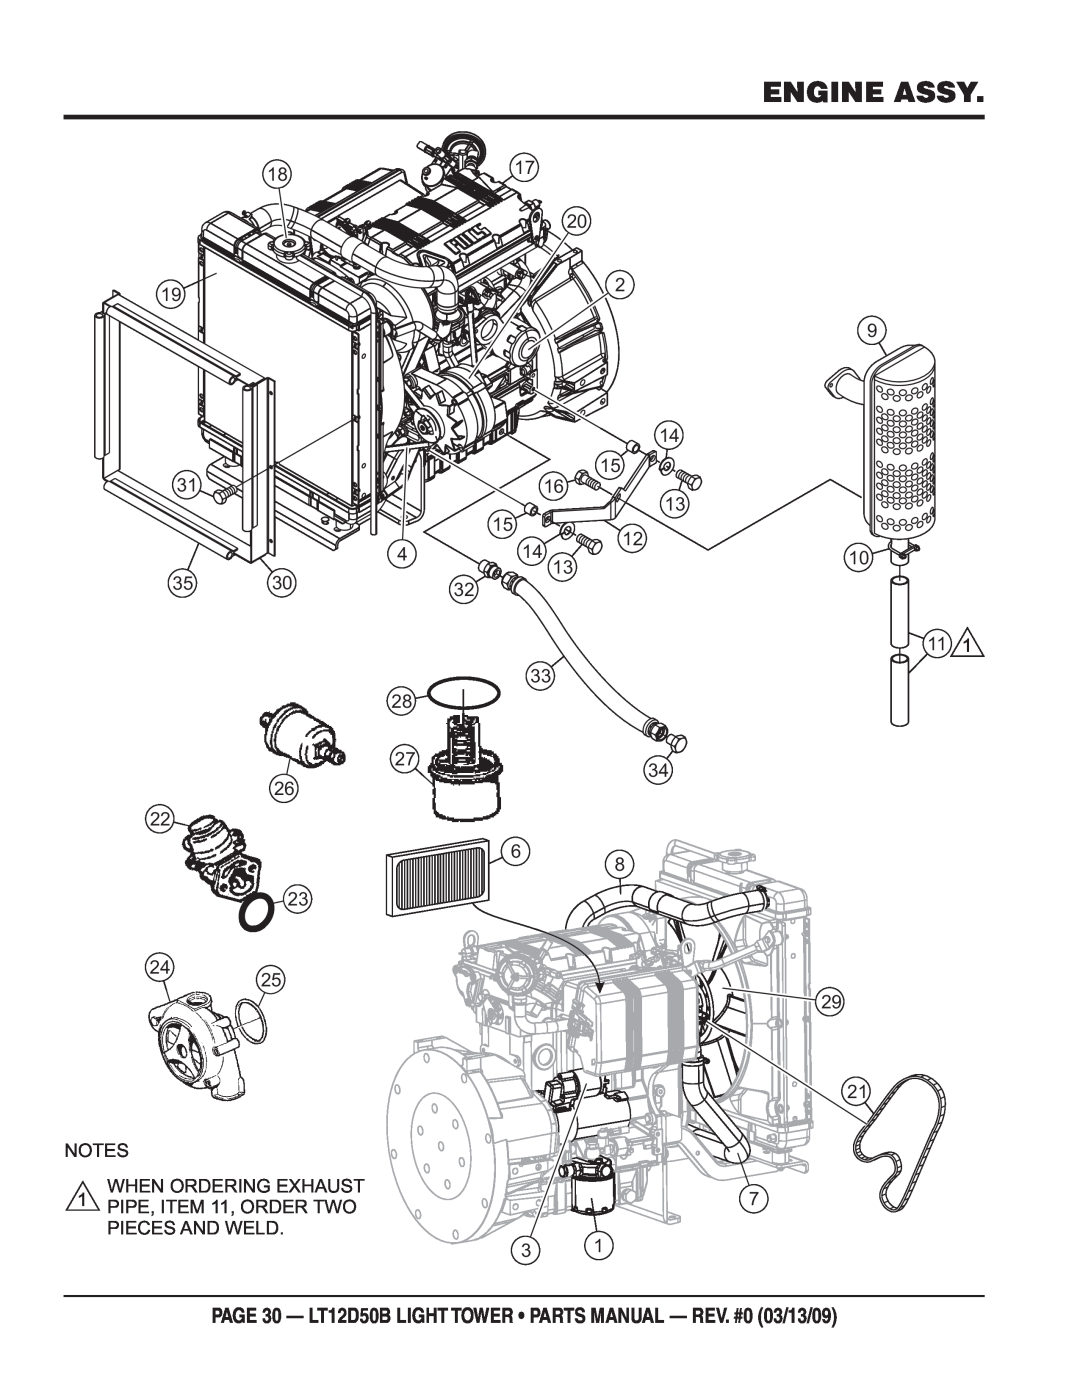 Multiquip manual Engine Assy, PAGE 30 - LT12D50B LIGHT TOWER PARTS MANUAL - REV. #0 03/13/09 